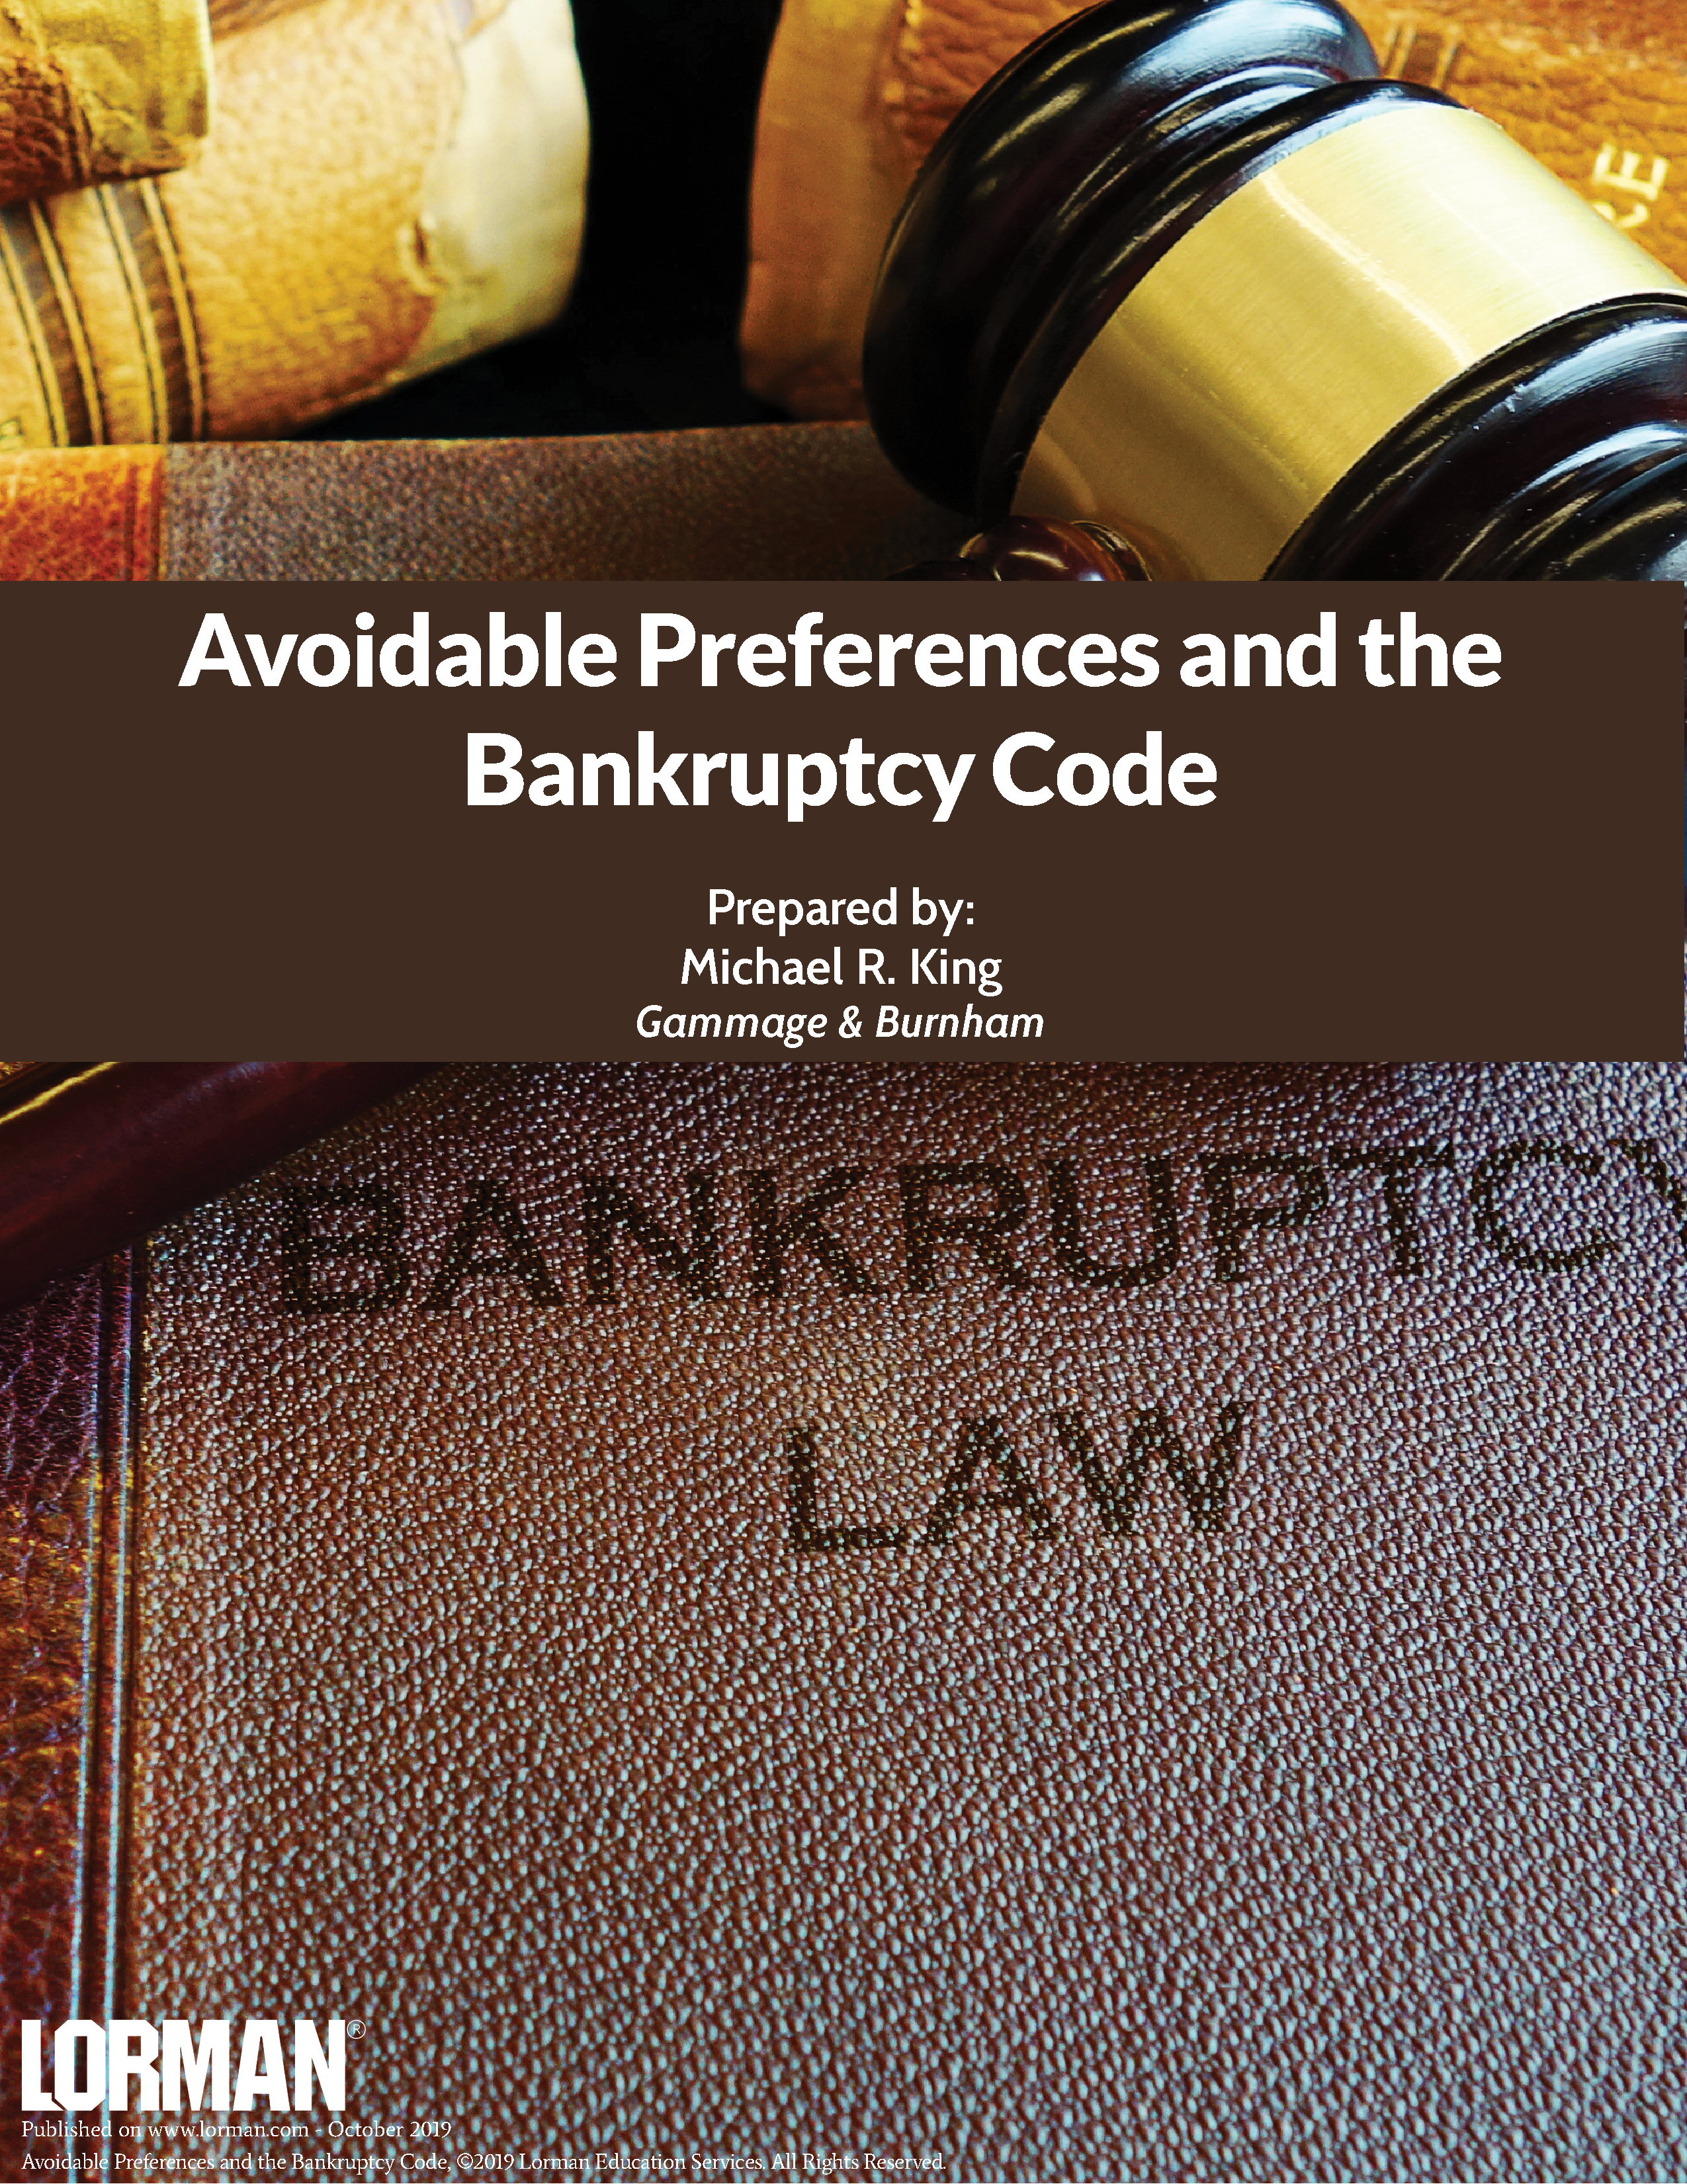 Avoidable Preferences and the Bankruptcy Code